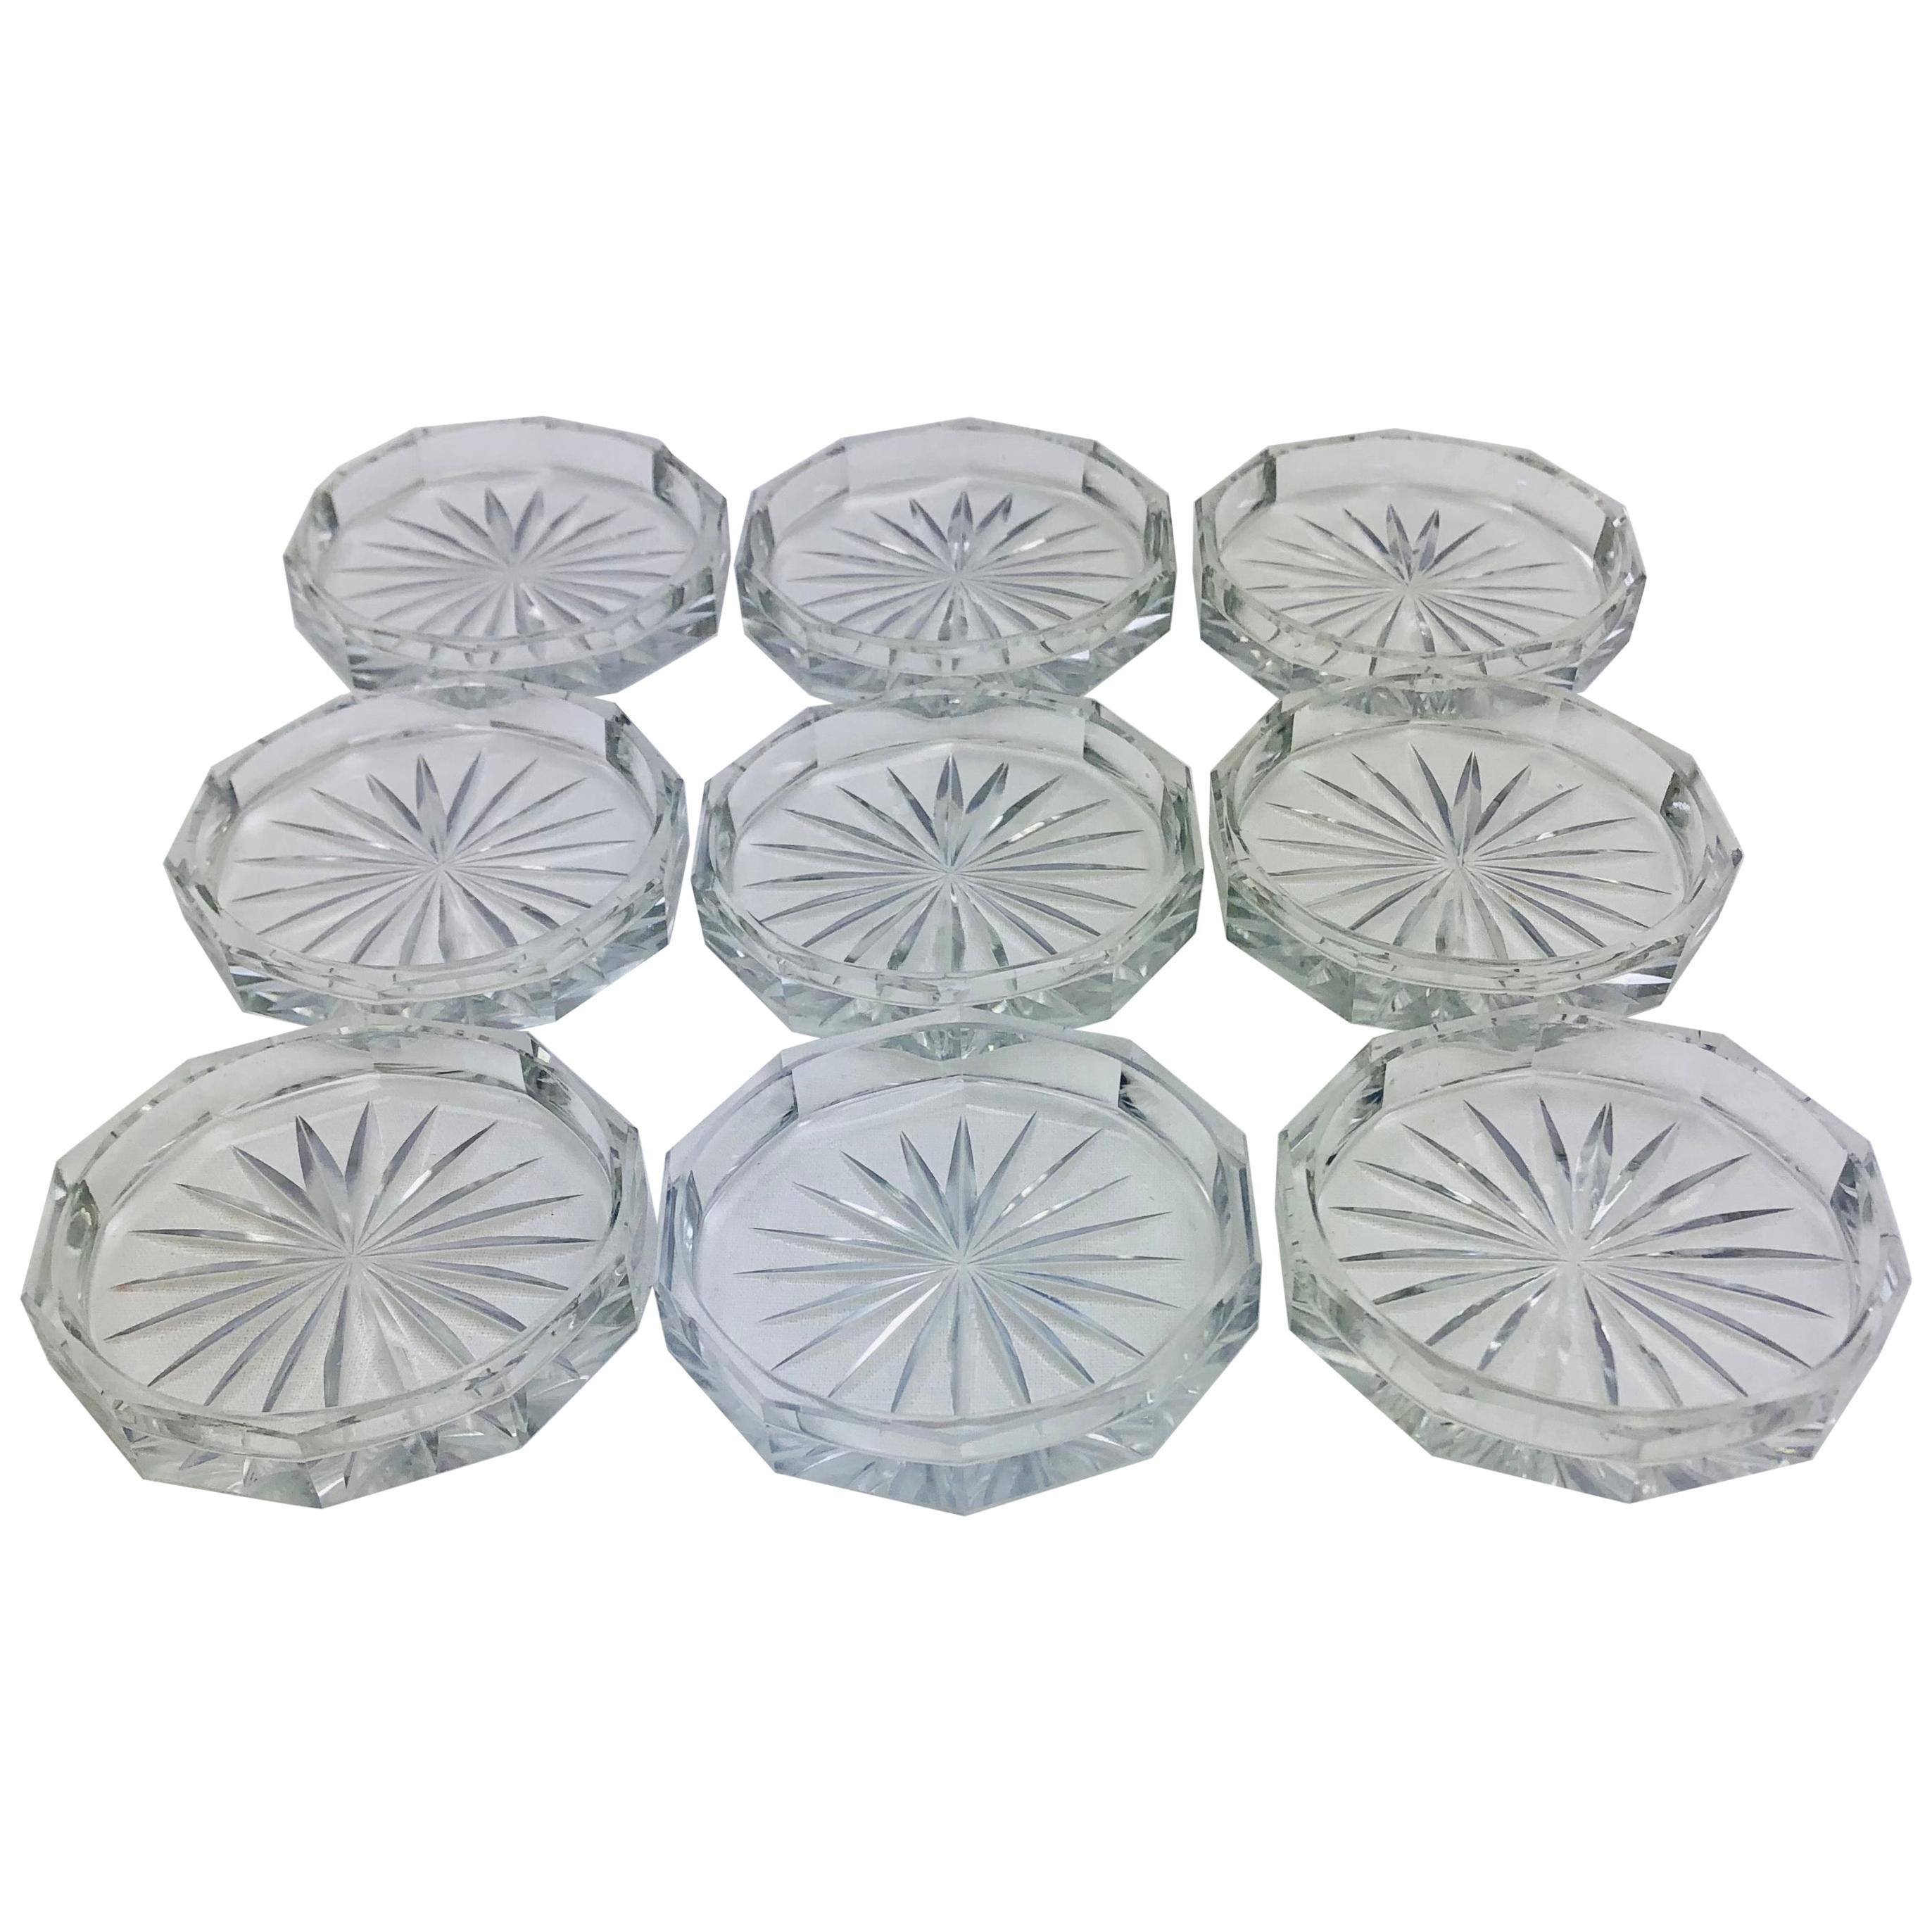 Set of 9 Crystal Wine or Champagne Flute Coasters Attributed to Baccarat